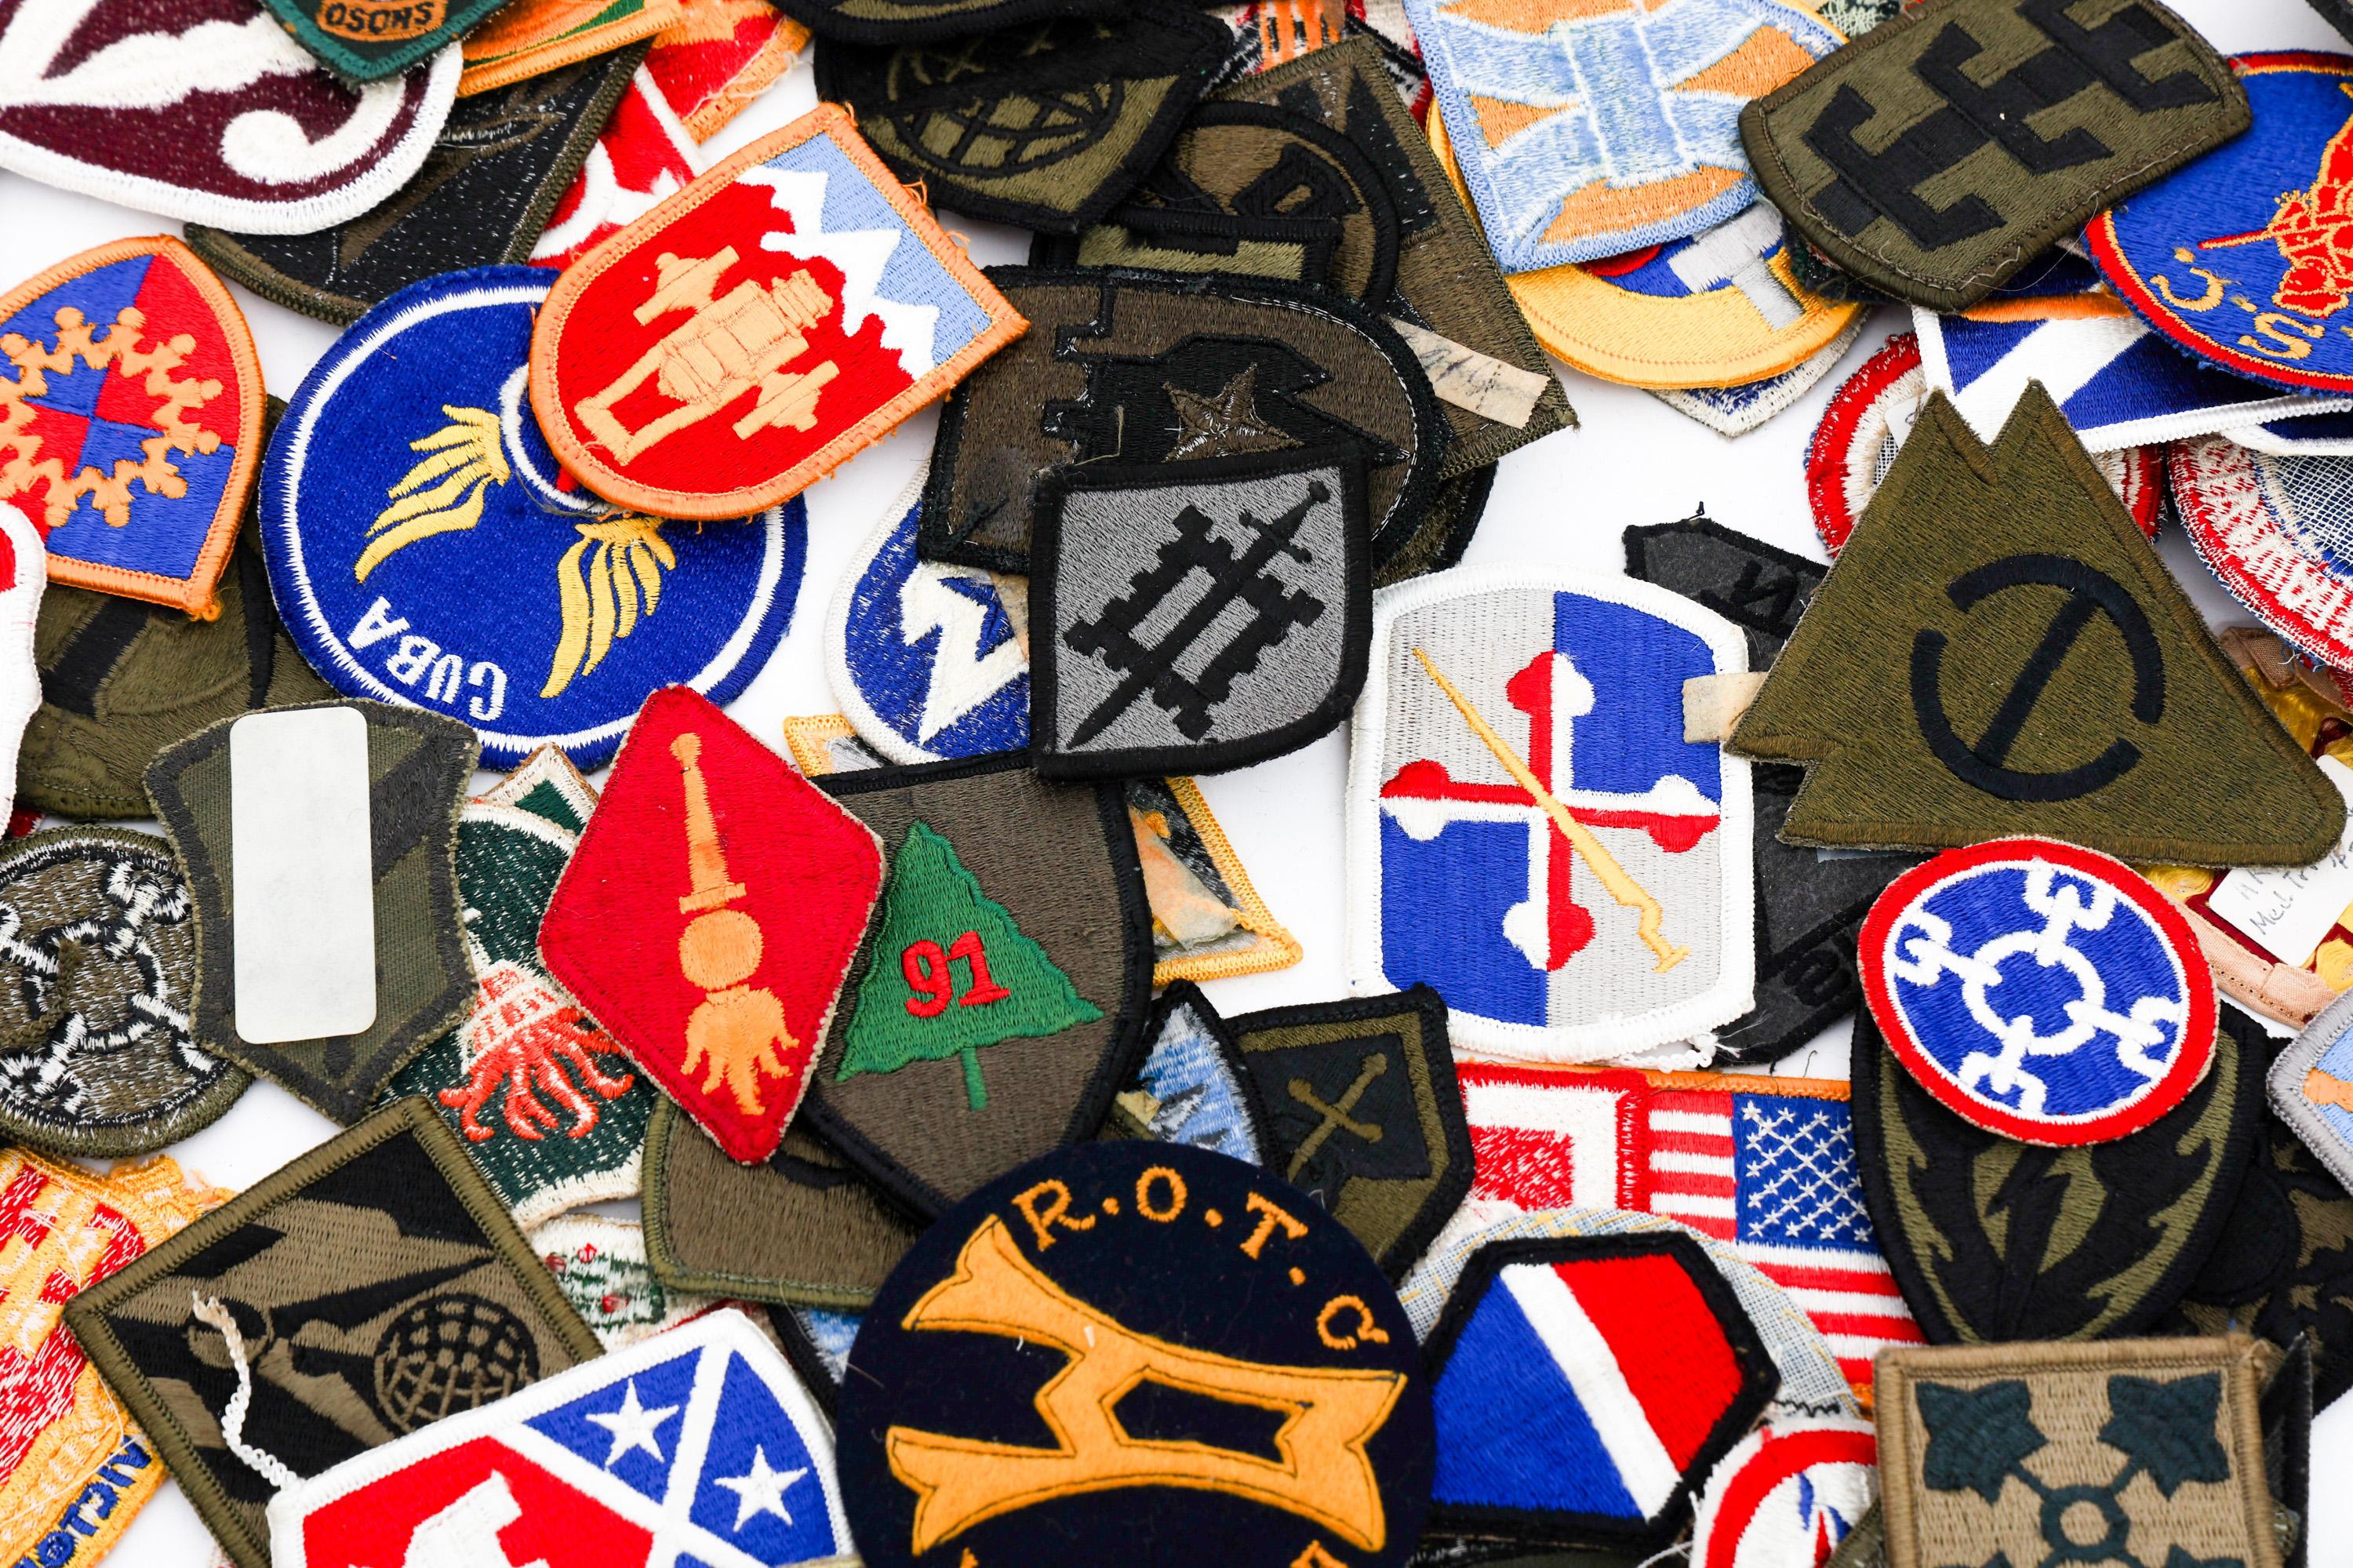 COLD WAR - CURRENT US ARMED FORCES PATCHES